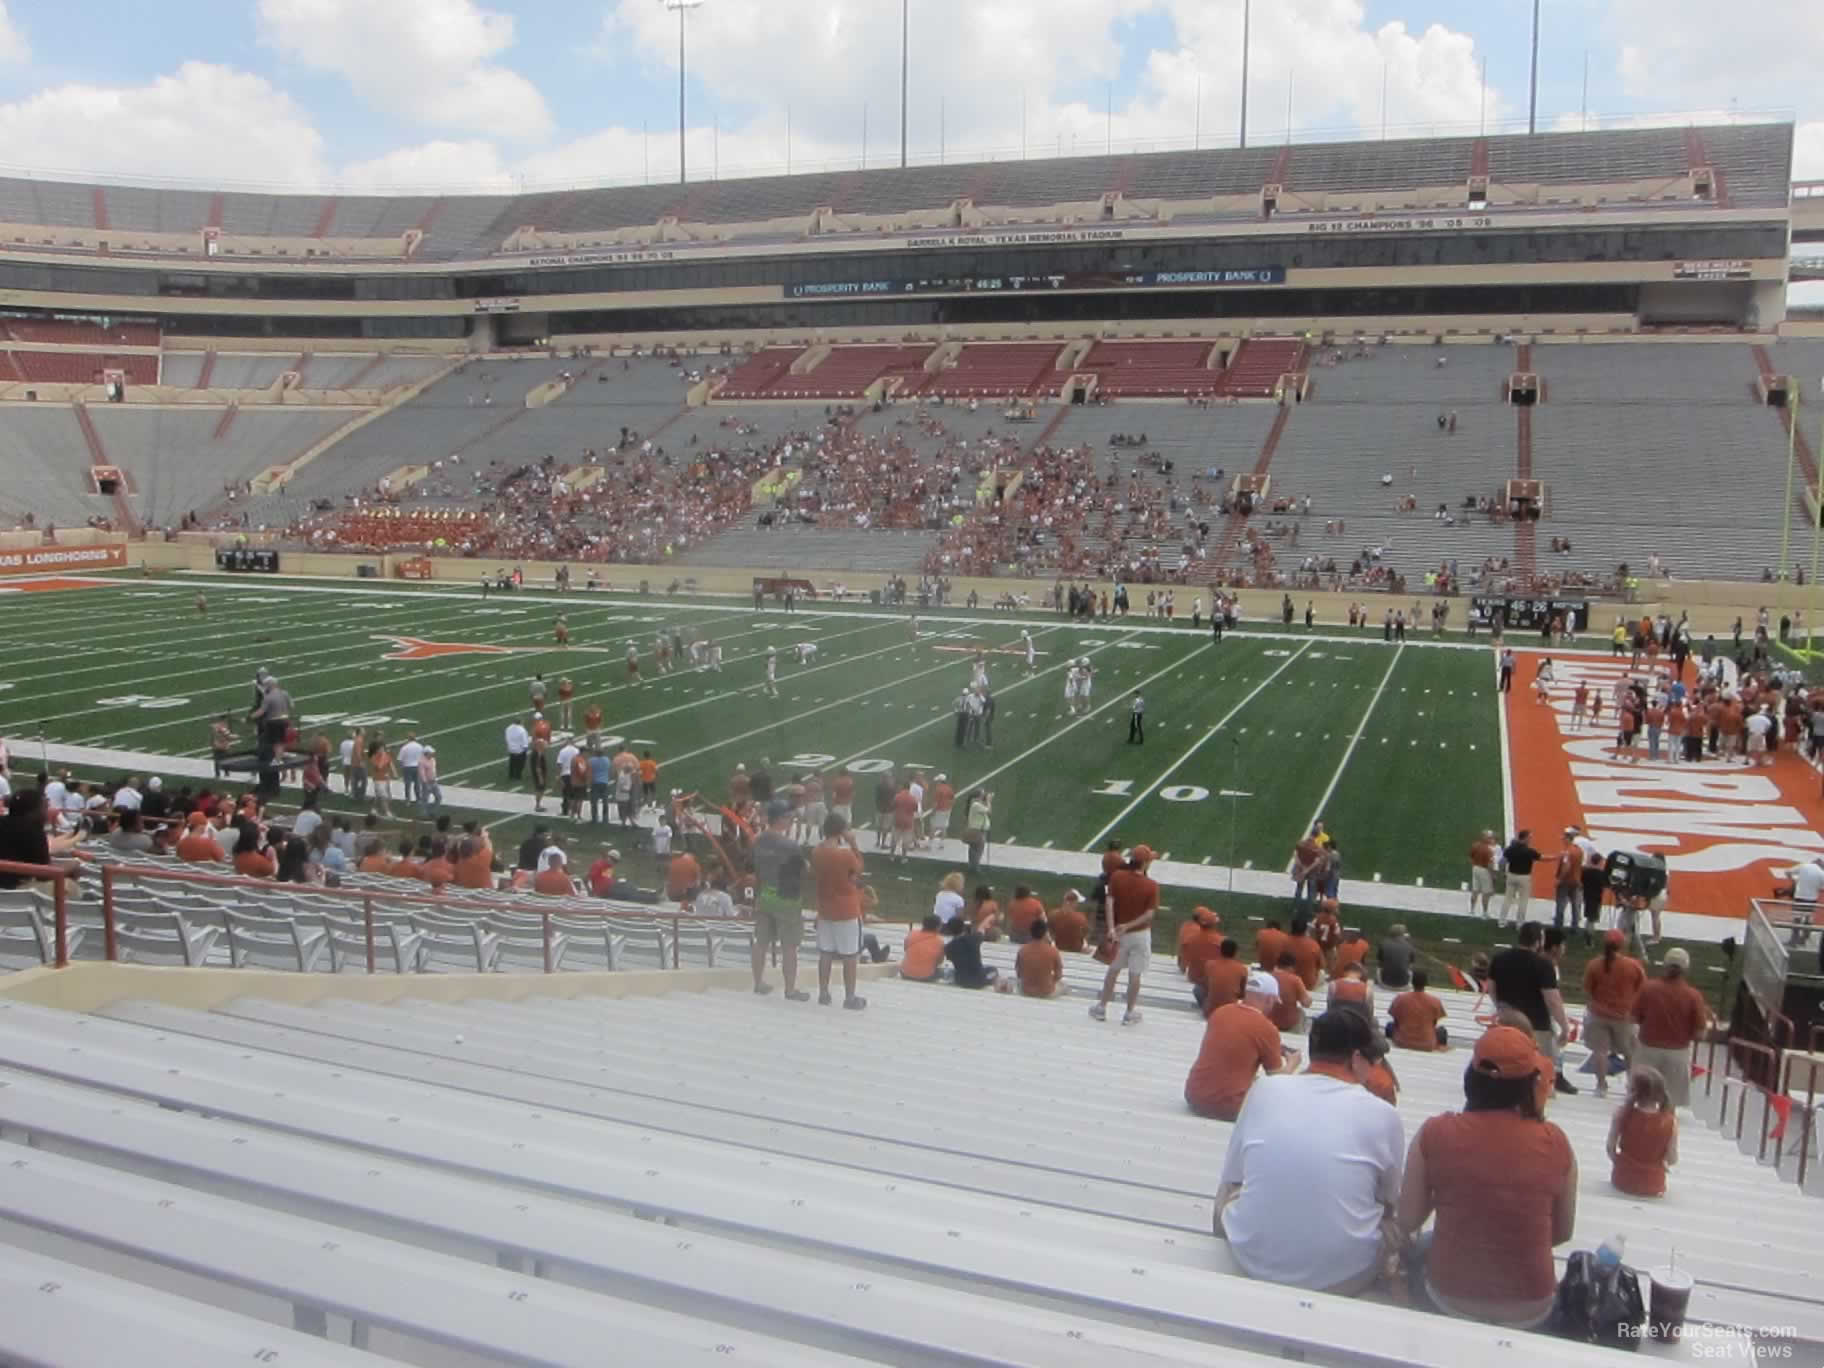 section 2, row 30 seat view  - dkr-texas memorial stadium